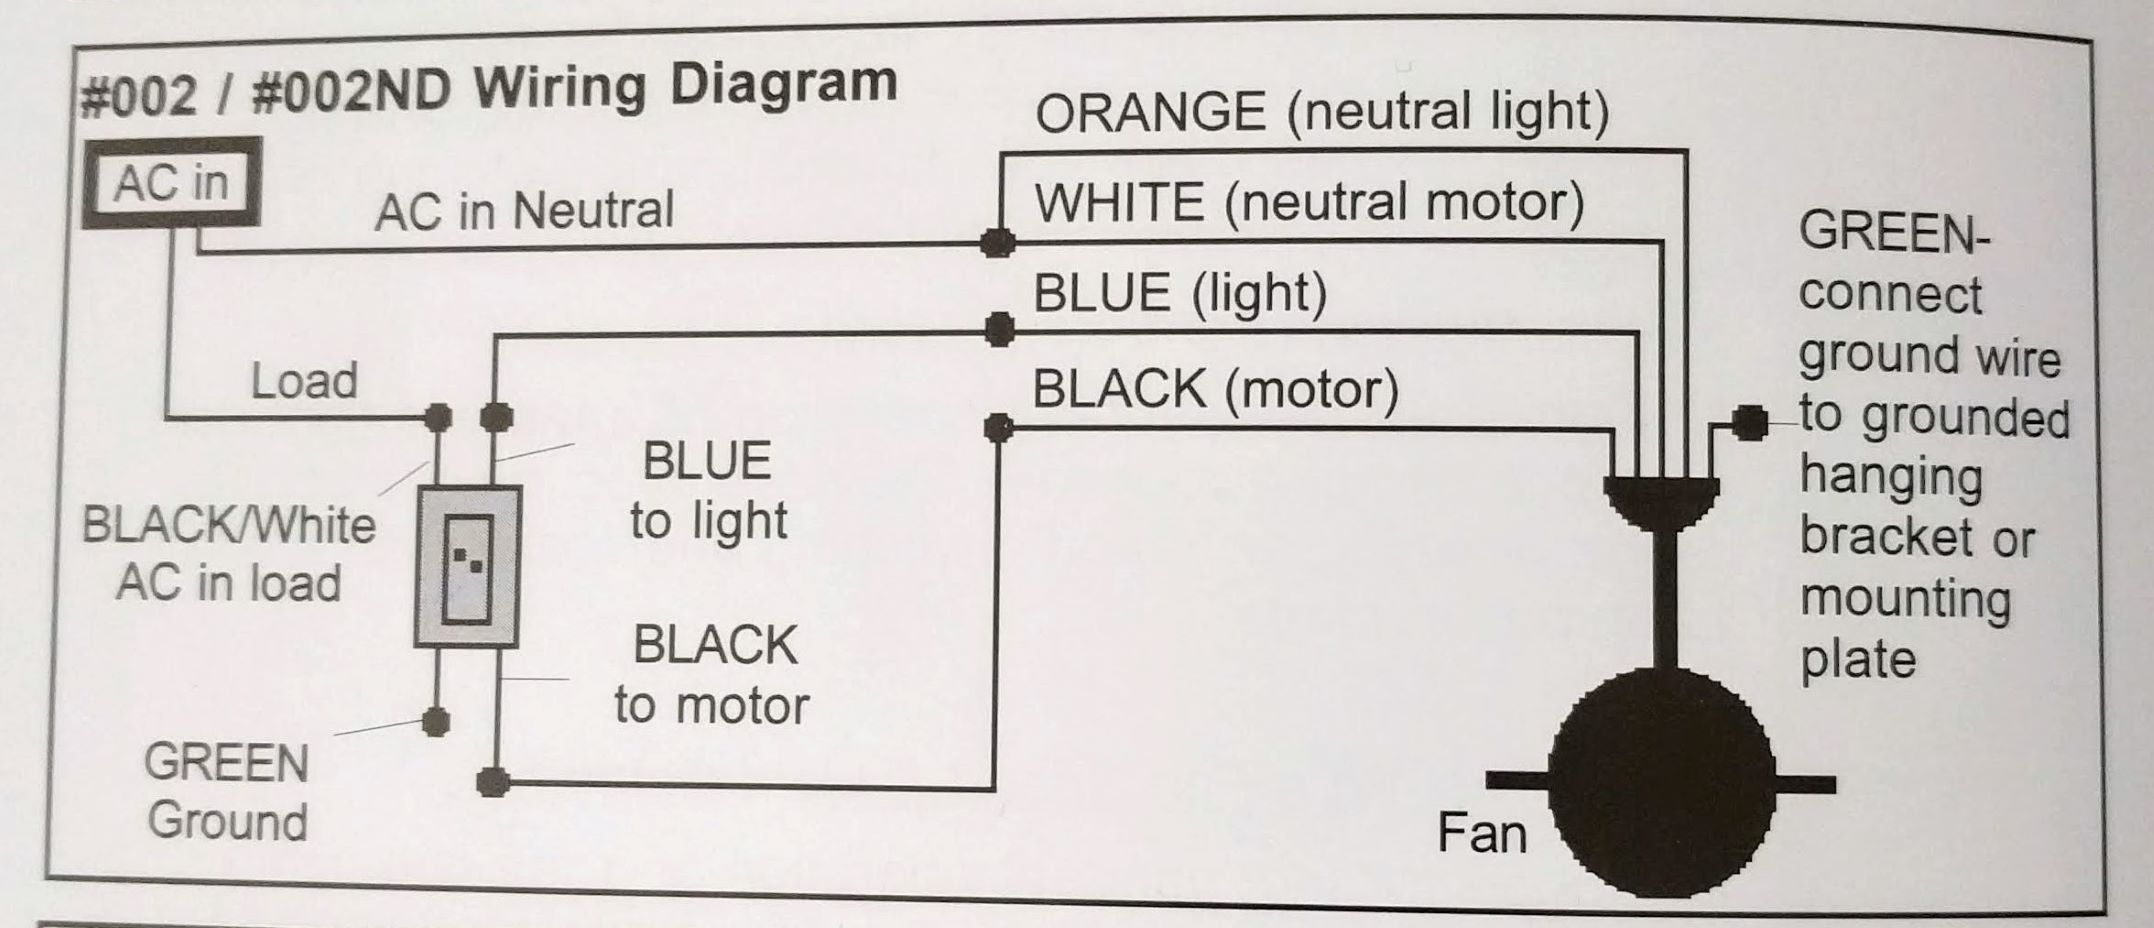 Wiring A Ceiling Fan With Black White Red Green In with dimensions 2154 X 928